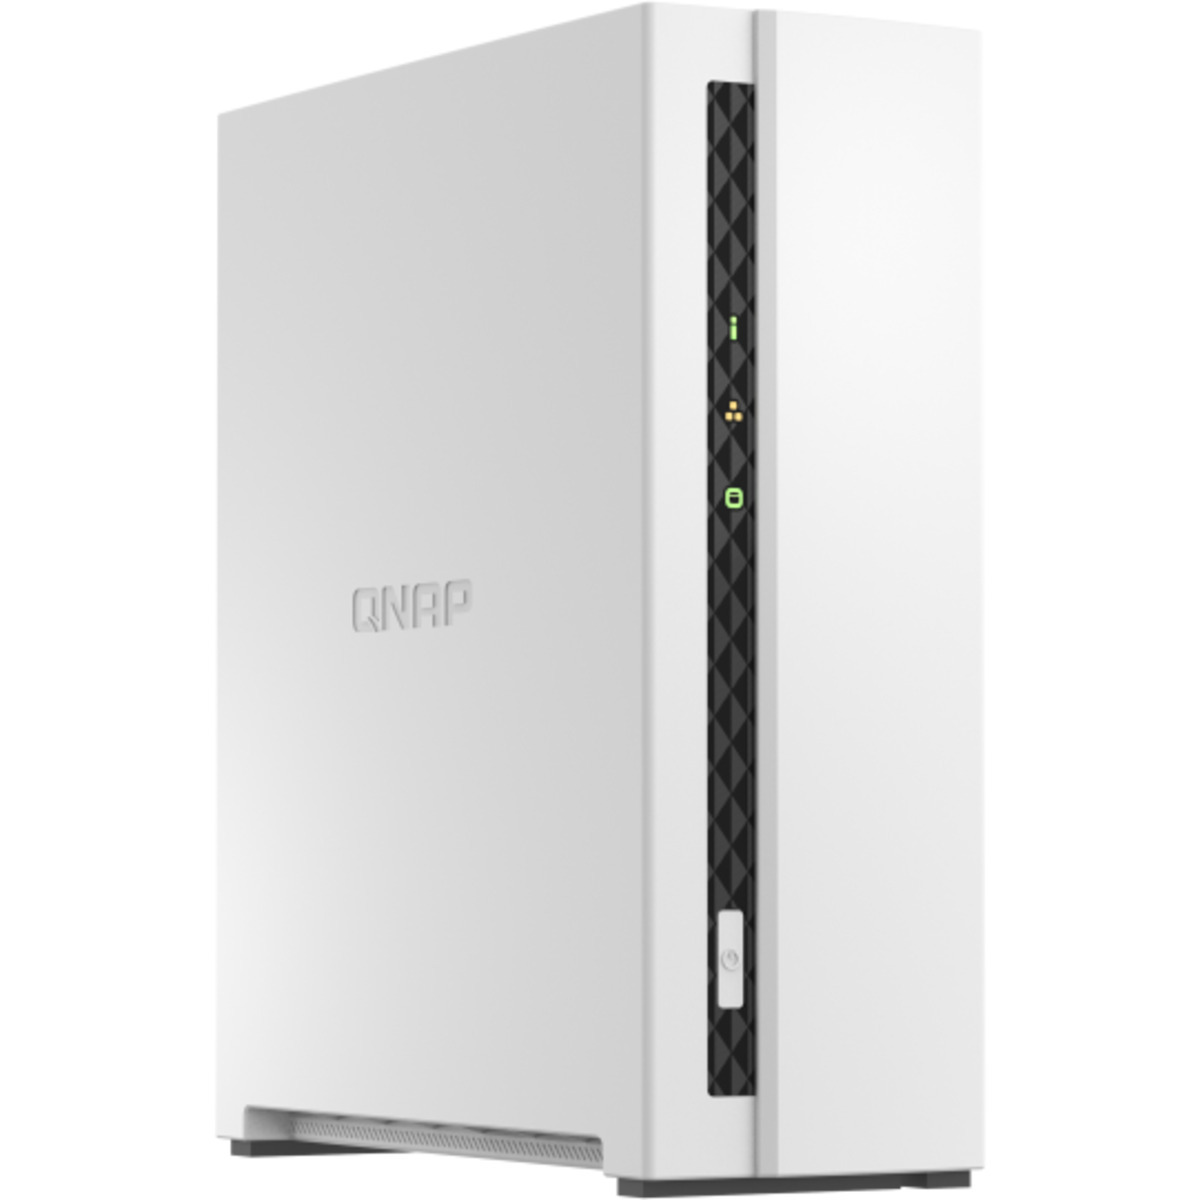 QNAP TS-133 16tb 1-Bay Desktop Personal / Basic Home / Small Office NAS - Network Attached Storage Device 1x16tb Western Digital Ultrastar DC HC550 WUH721816ALE6L4 3.5 7200rpm SATA 6Gb/s HDD ENTERPRISE Class Drives Installed - Burn-In Tested TS-133